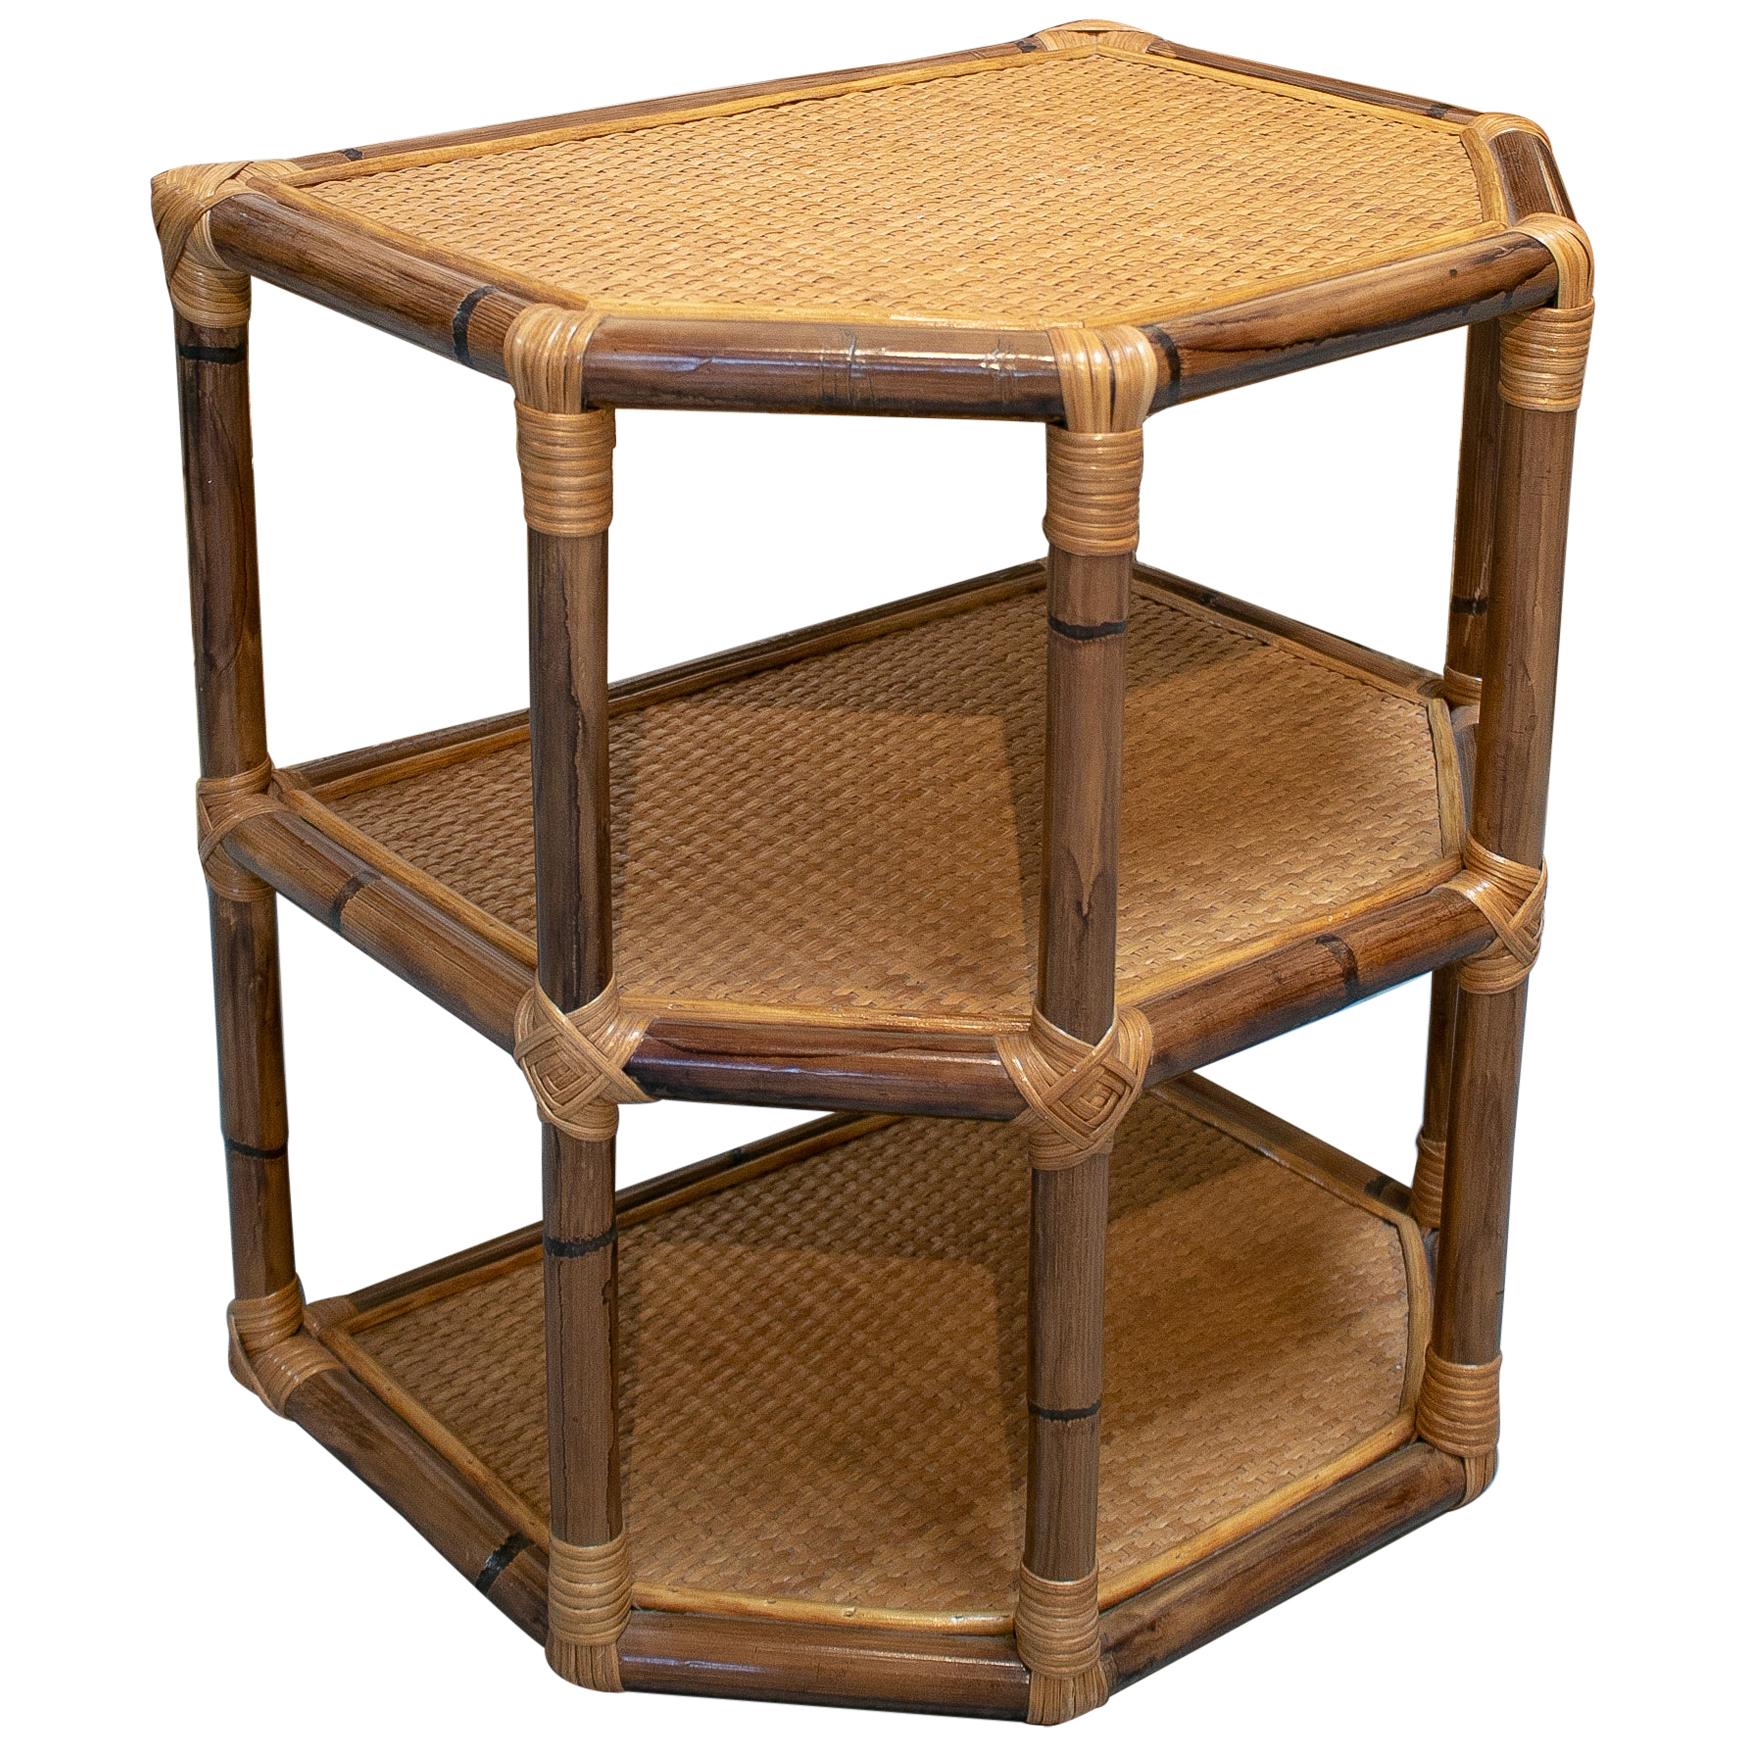 1980s Spanish Bamboo and Wicker 2-Shelve Side Table